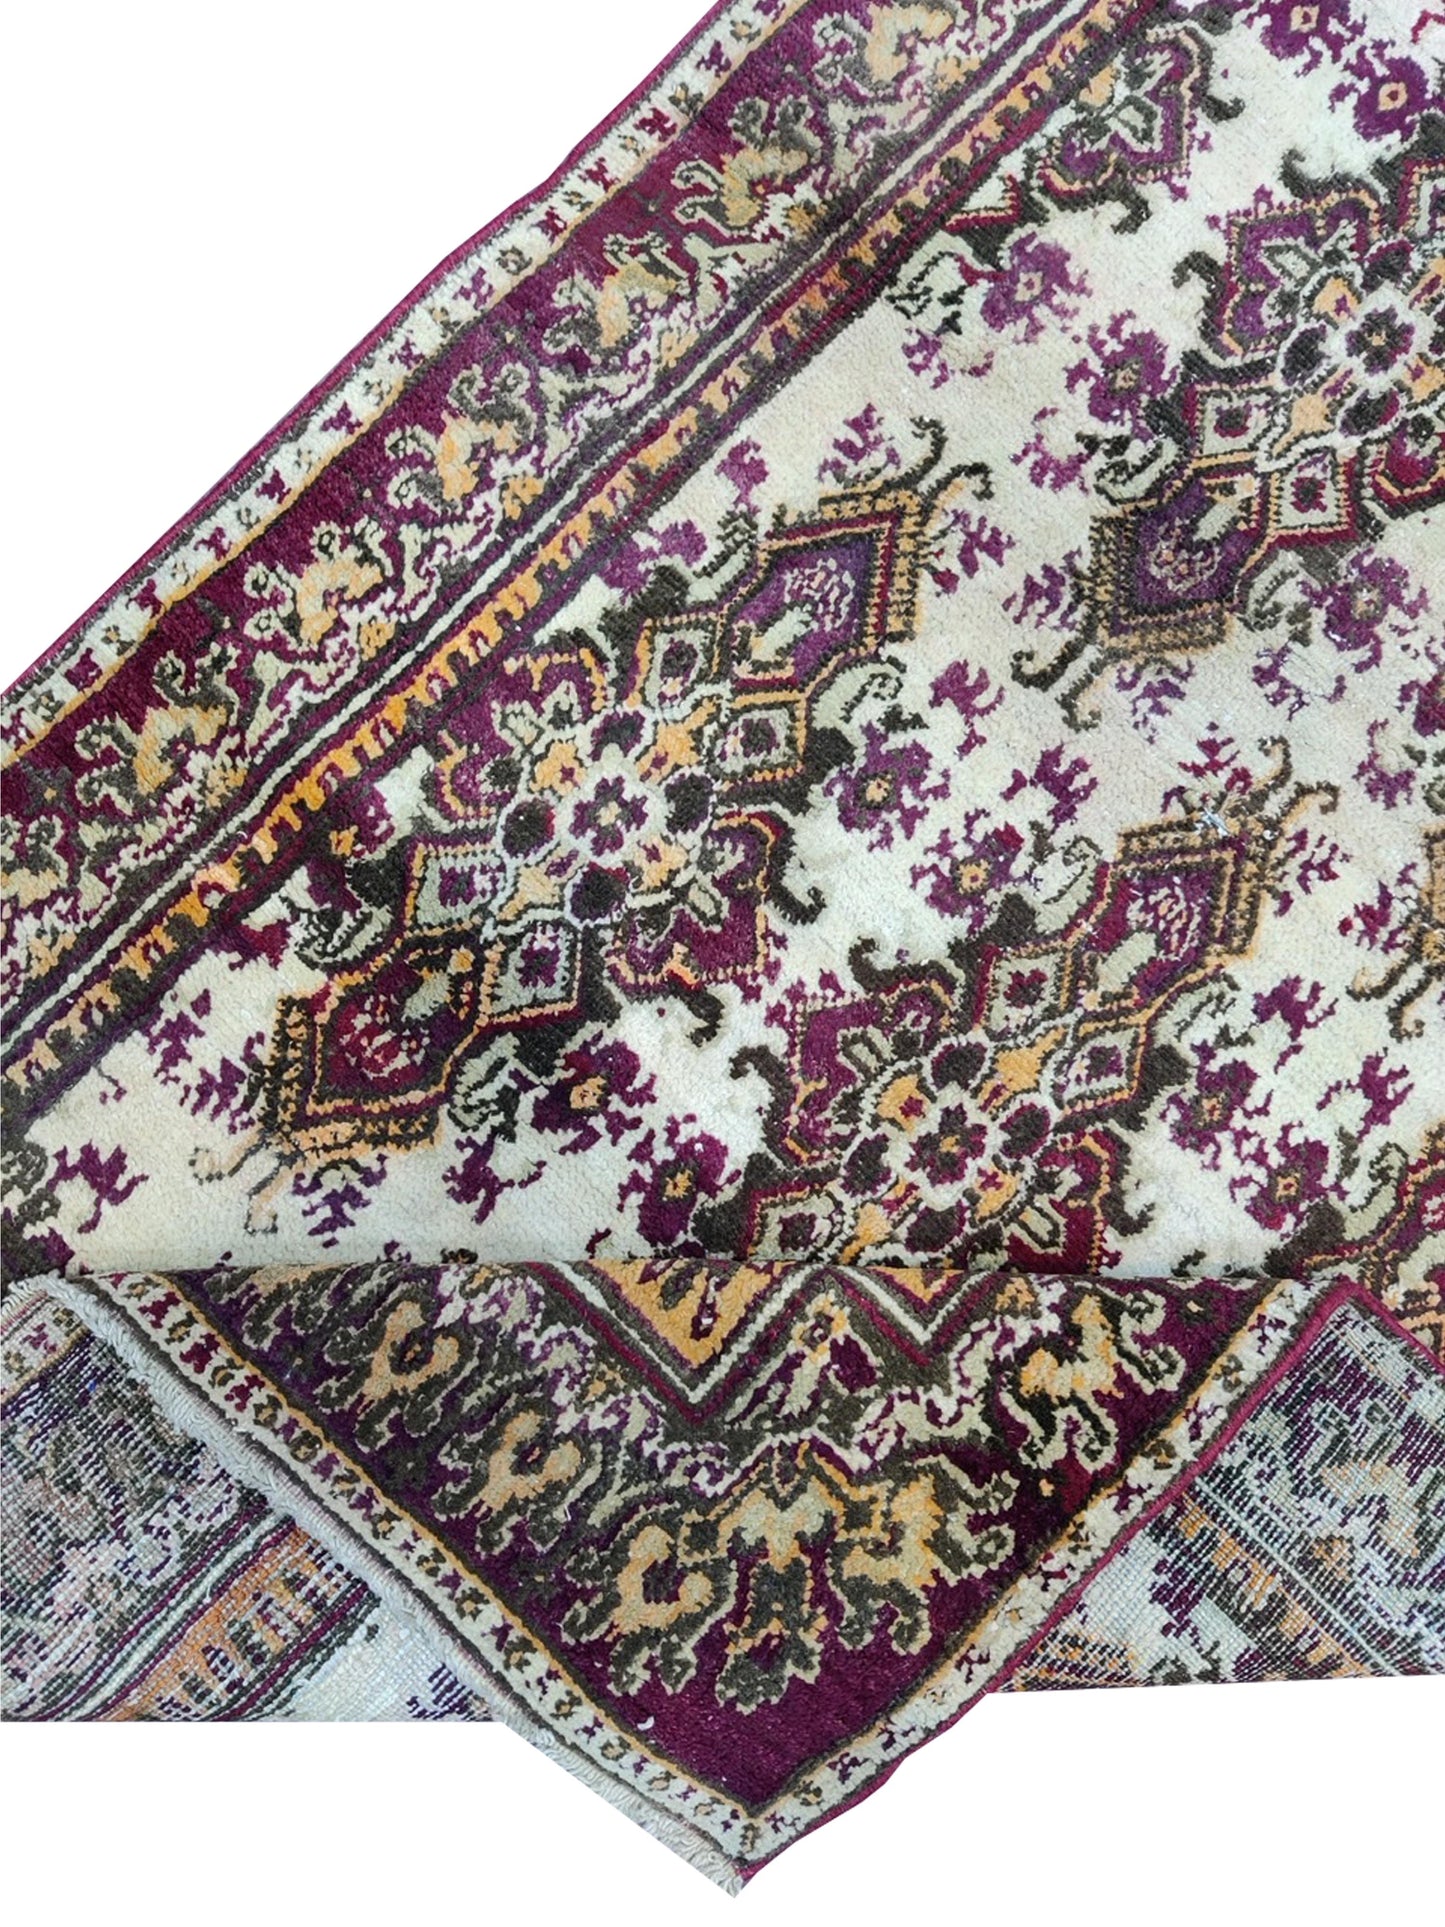 Get trendy with Ivory Red Antique Khotan Handknotted Rug 3.0x5.7ft 91x170cms - Tribal Rugs available at Jaipur Oriental Rugs. Grab yours for $921.25 today!